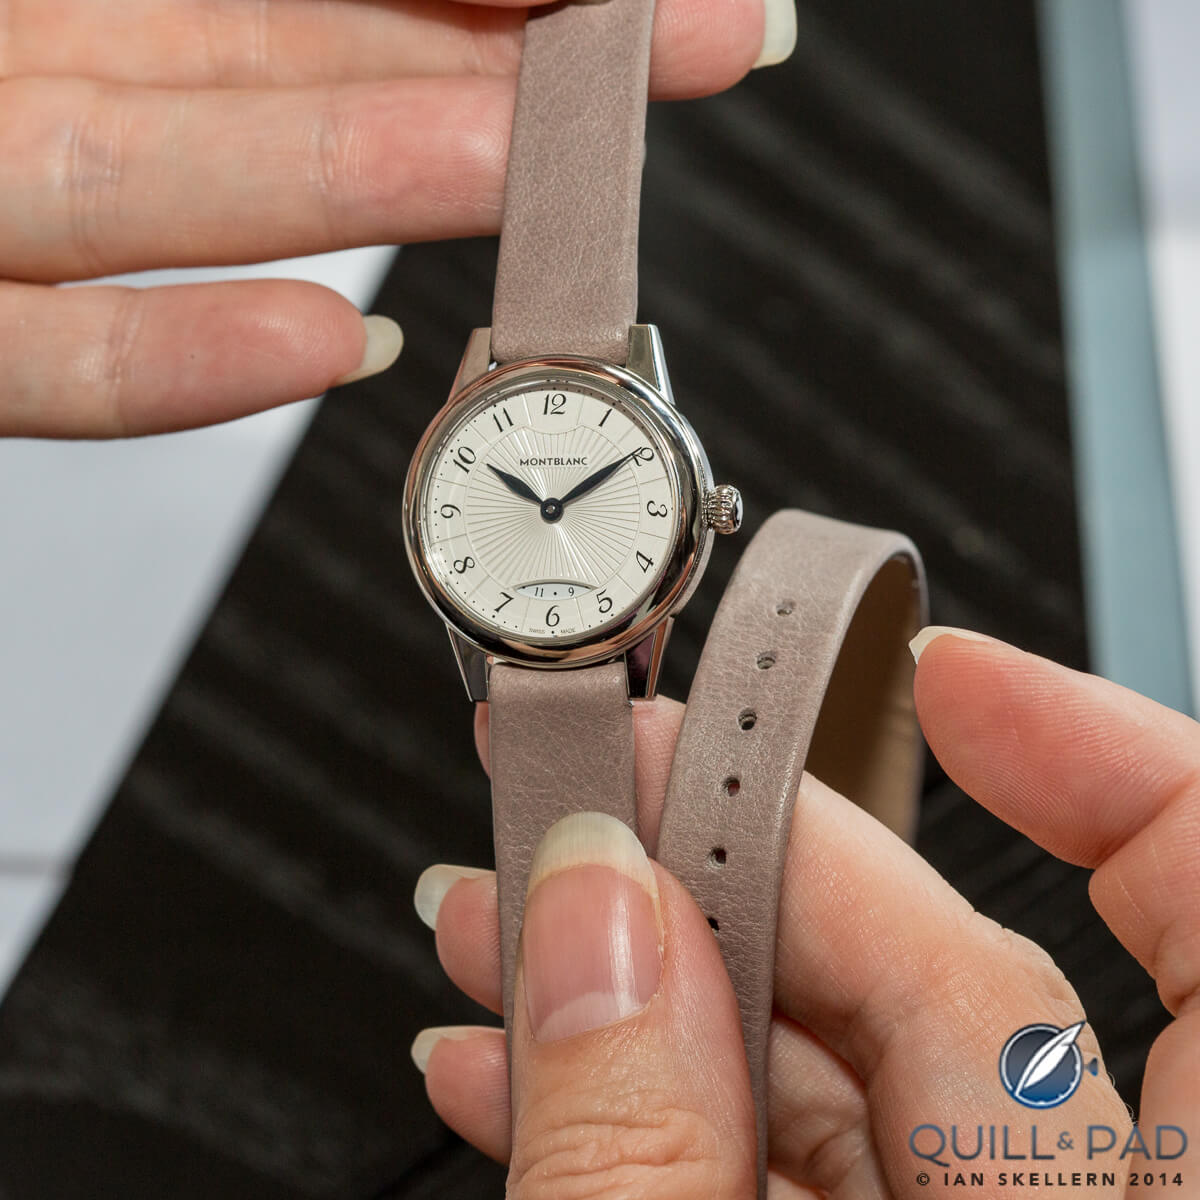 The Montblanc Bohème Date on a Montblanc double-wrap leather strap